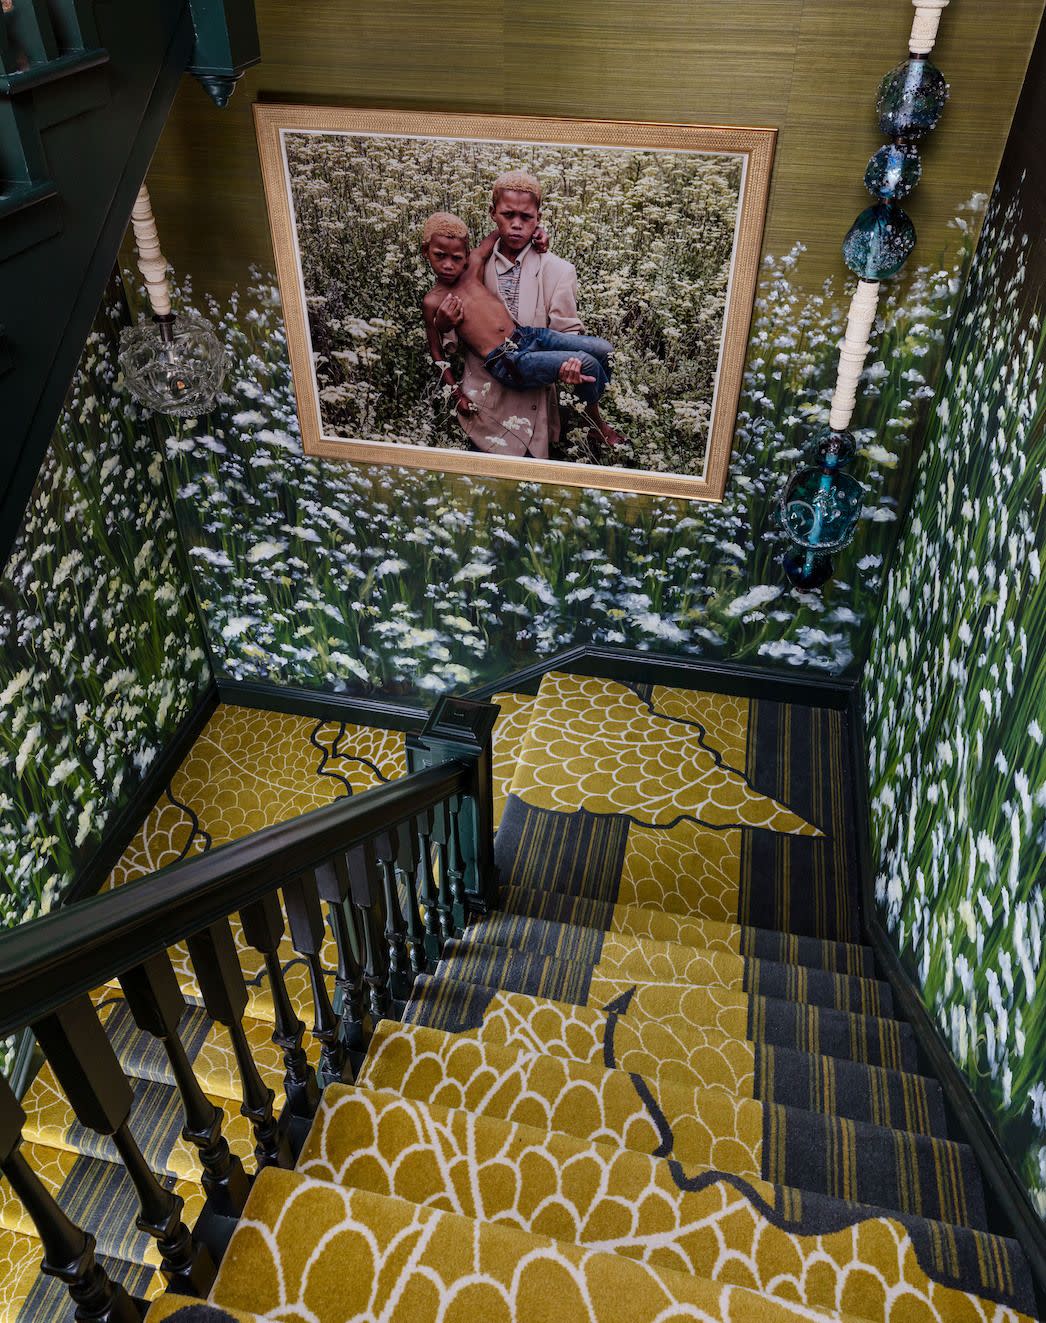 stairway of the kips bay show house designed by halden interiors, shot by nickolas sargent